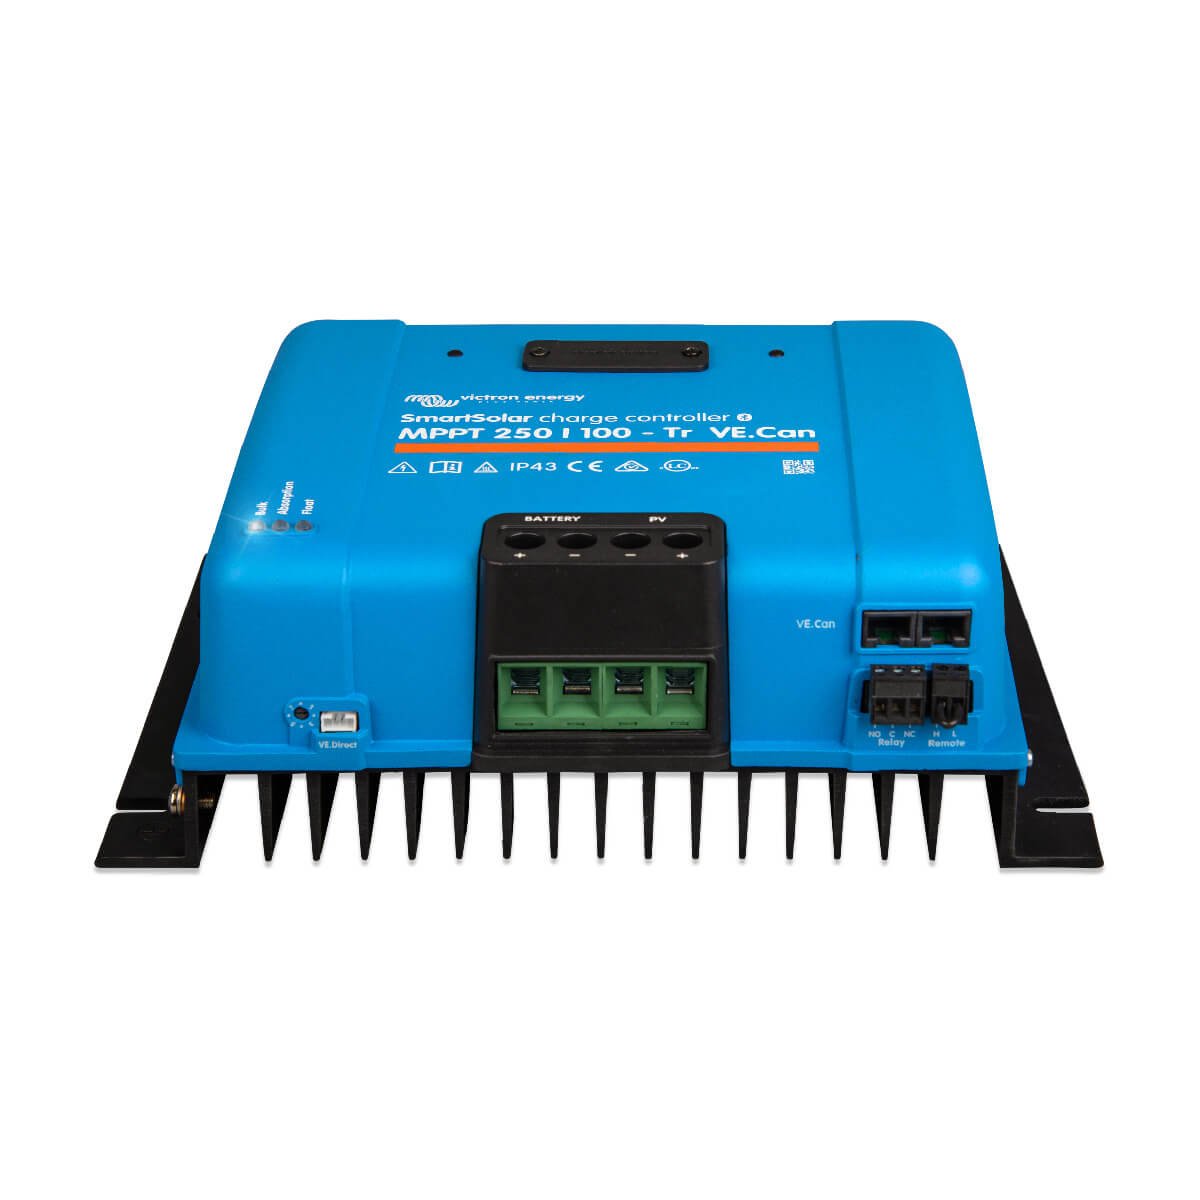 Blue Victron MPPT 250/100 - SmartSolar Charge Controller - Tr VE.Can with various ports and connectors, mounted on a black heatsink.